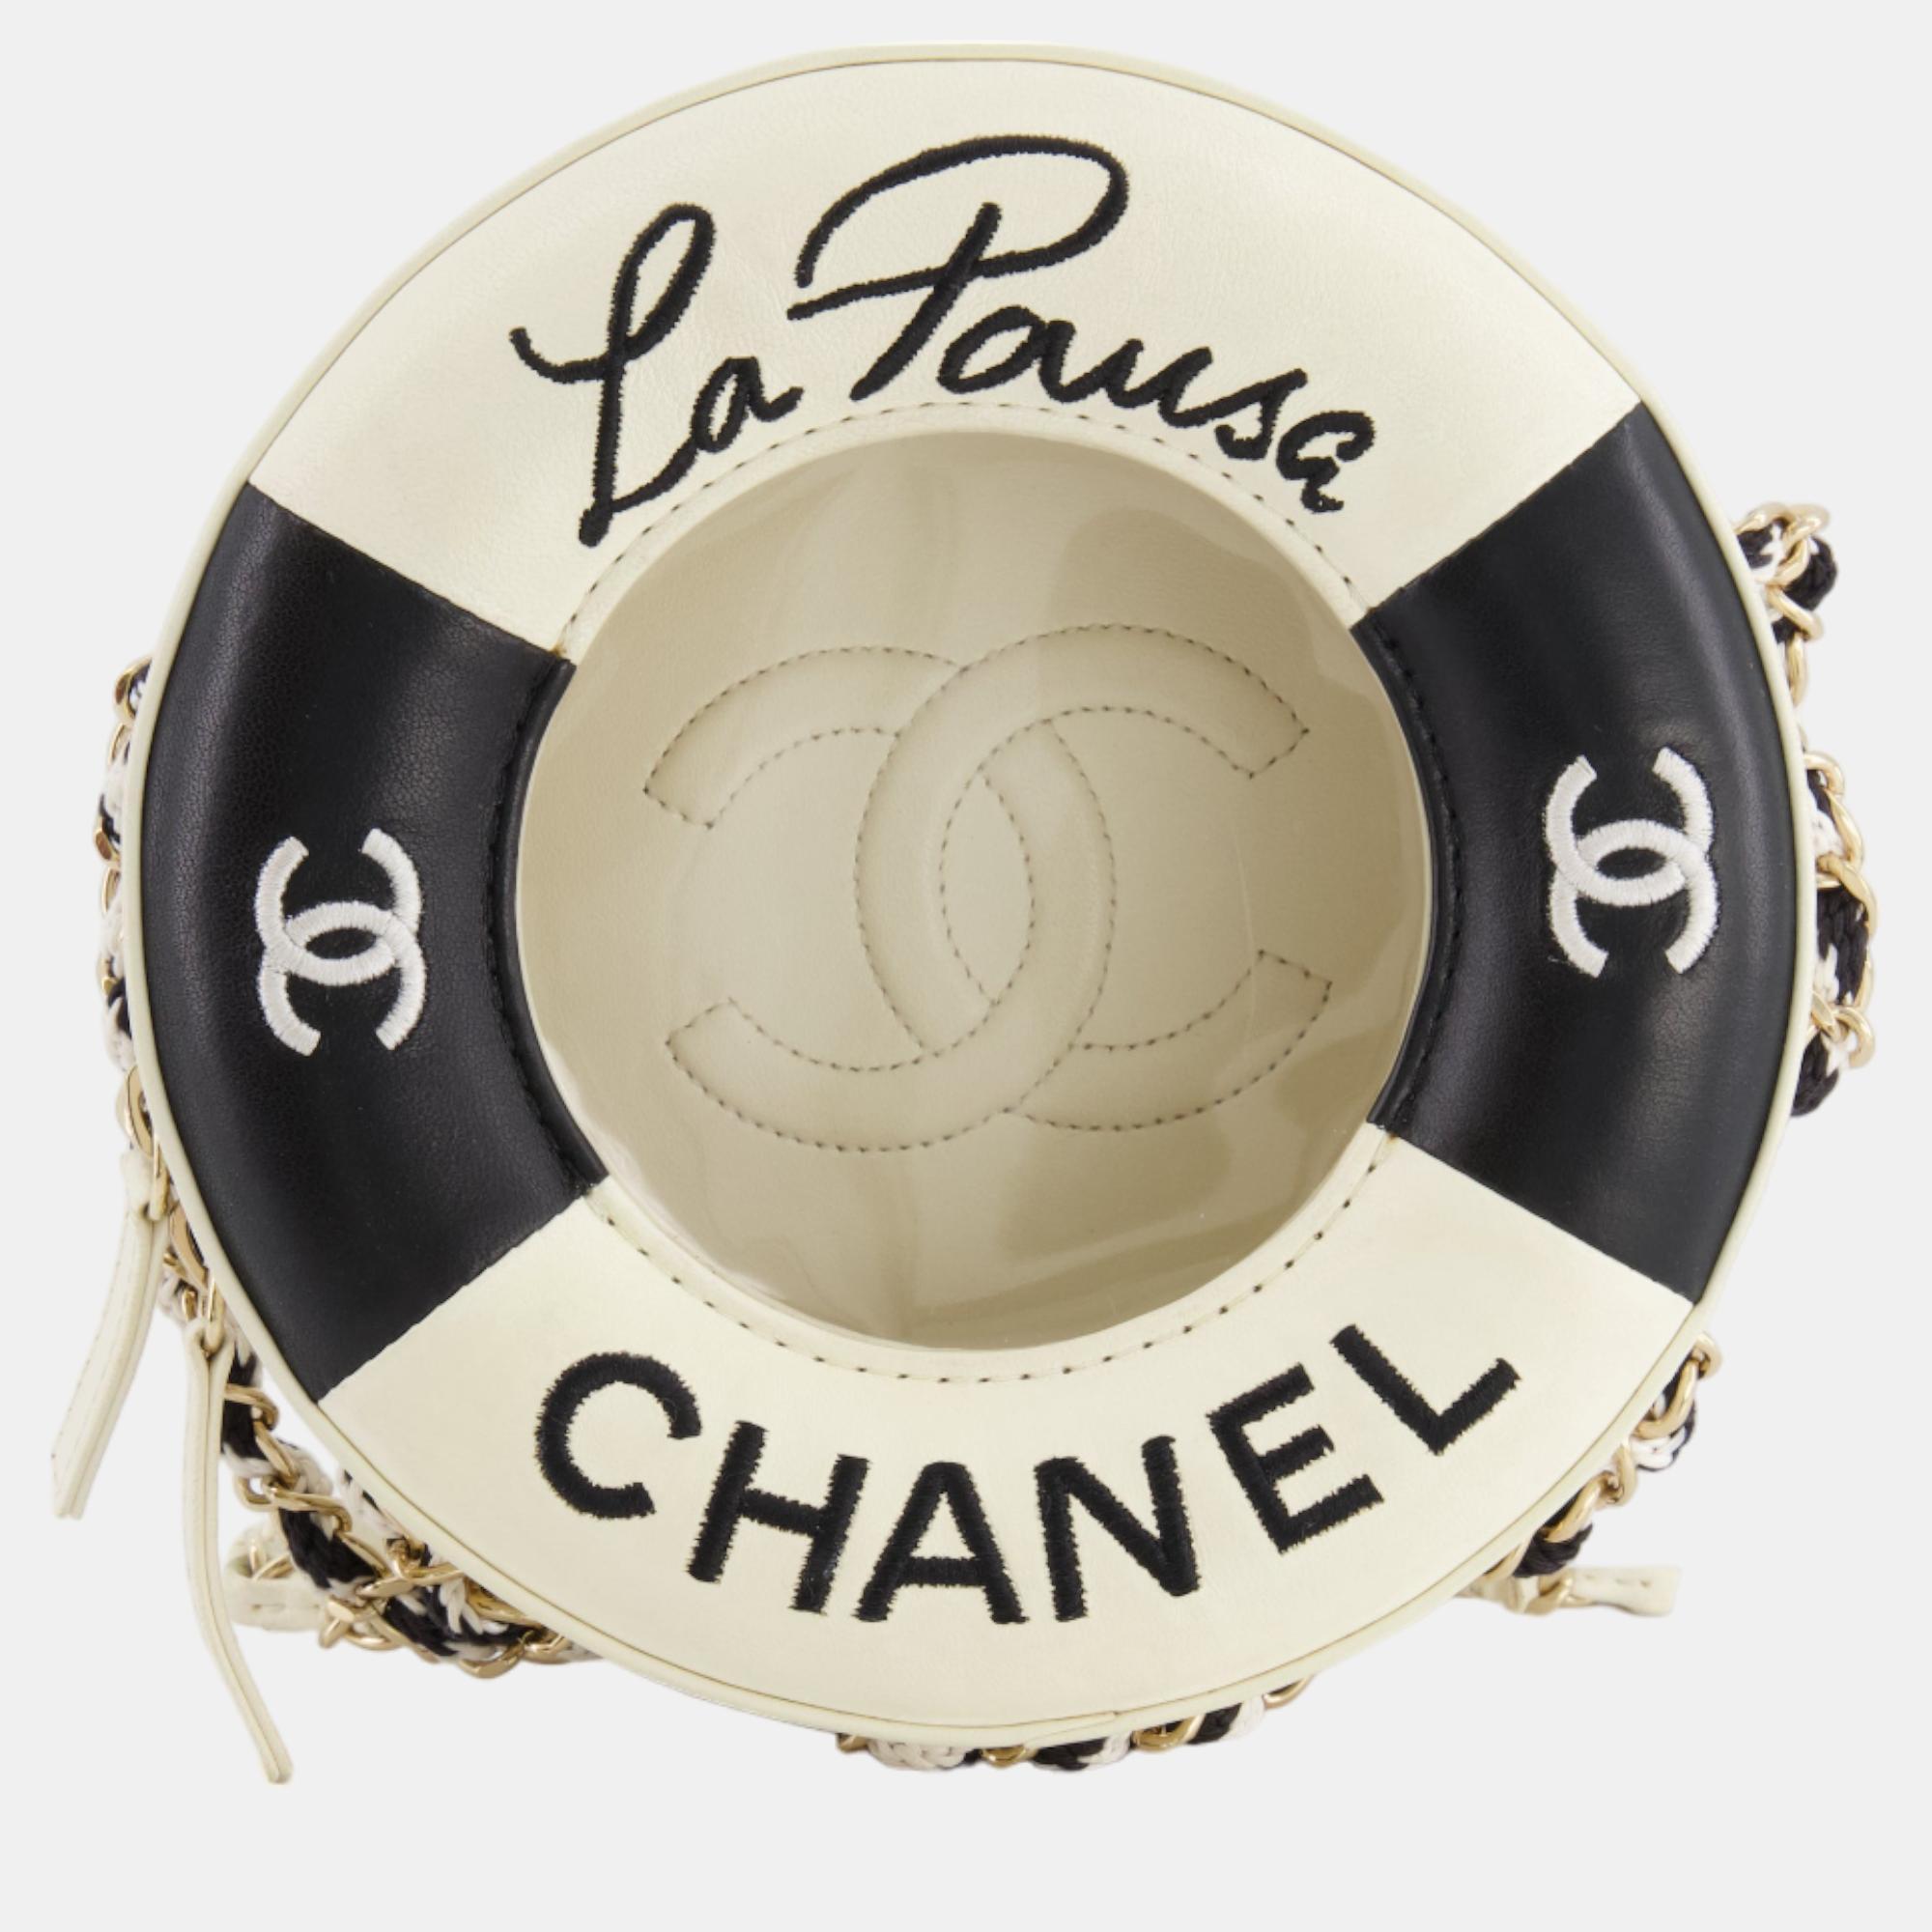 Chanel La Pausa Coco Lifesaver Bag In Black And White With Champagne Gold Hardware